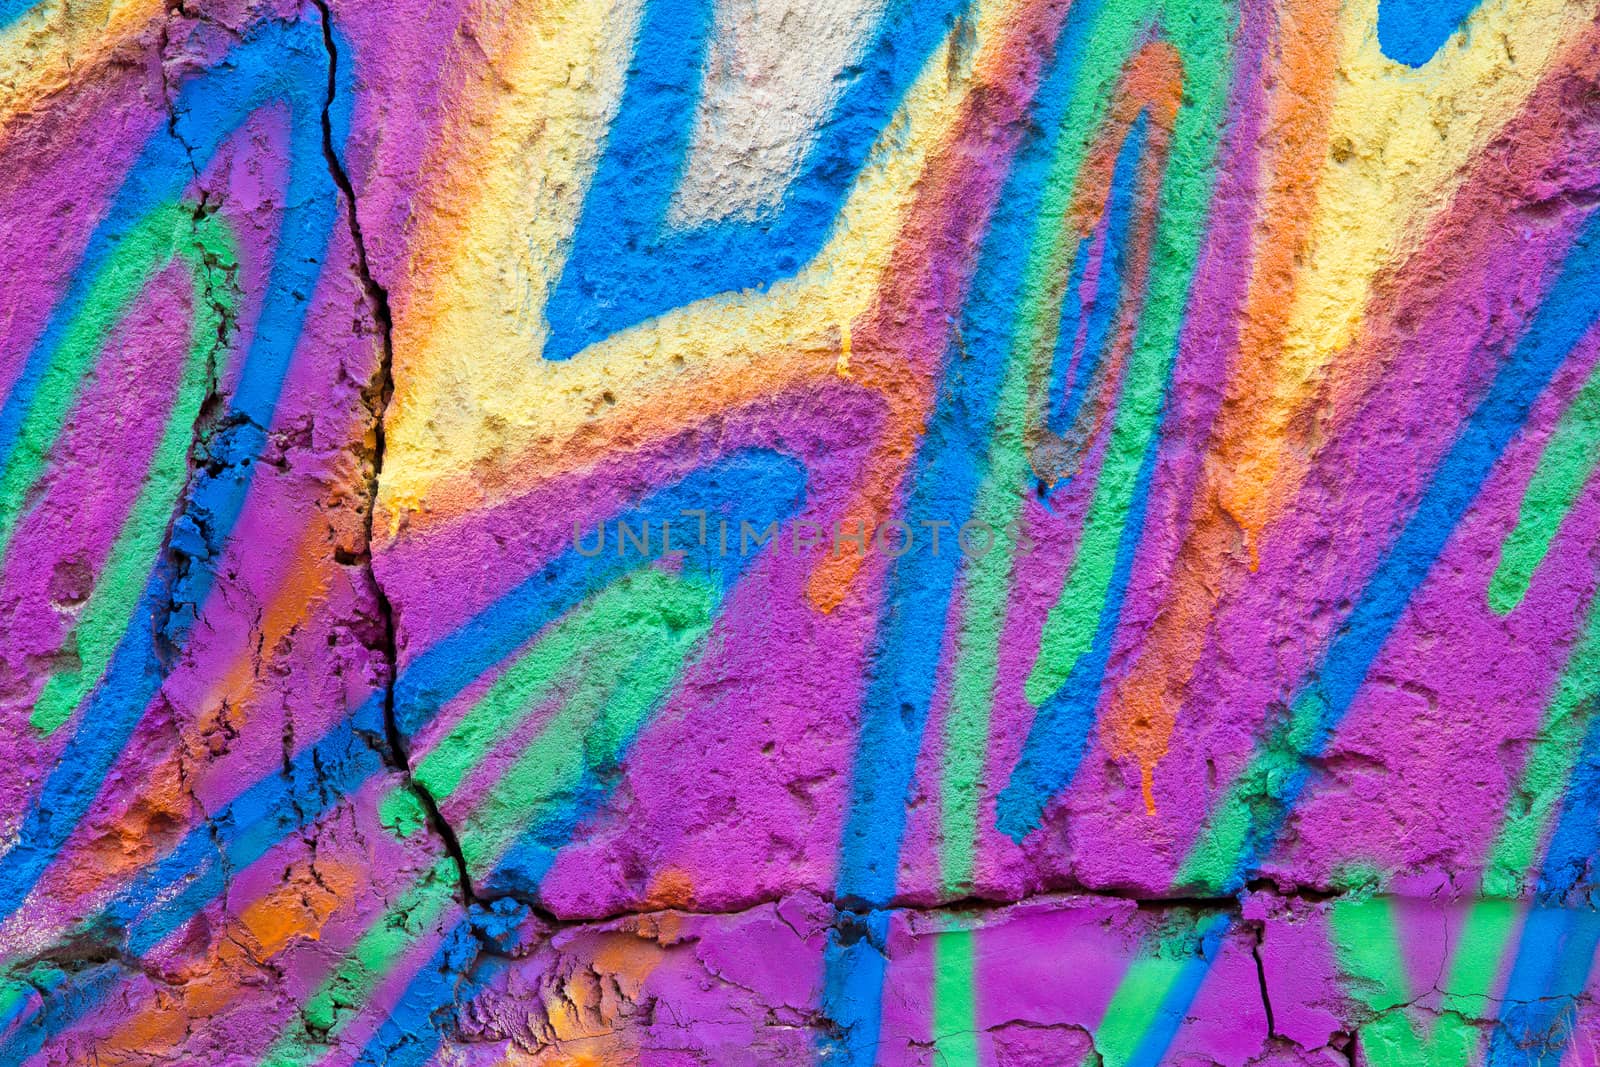 photo flagstone painted with bright colors. closeup